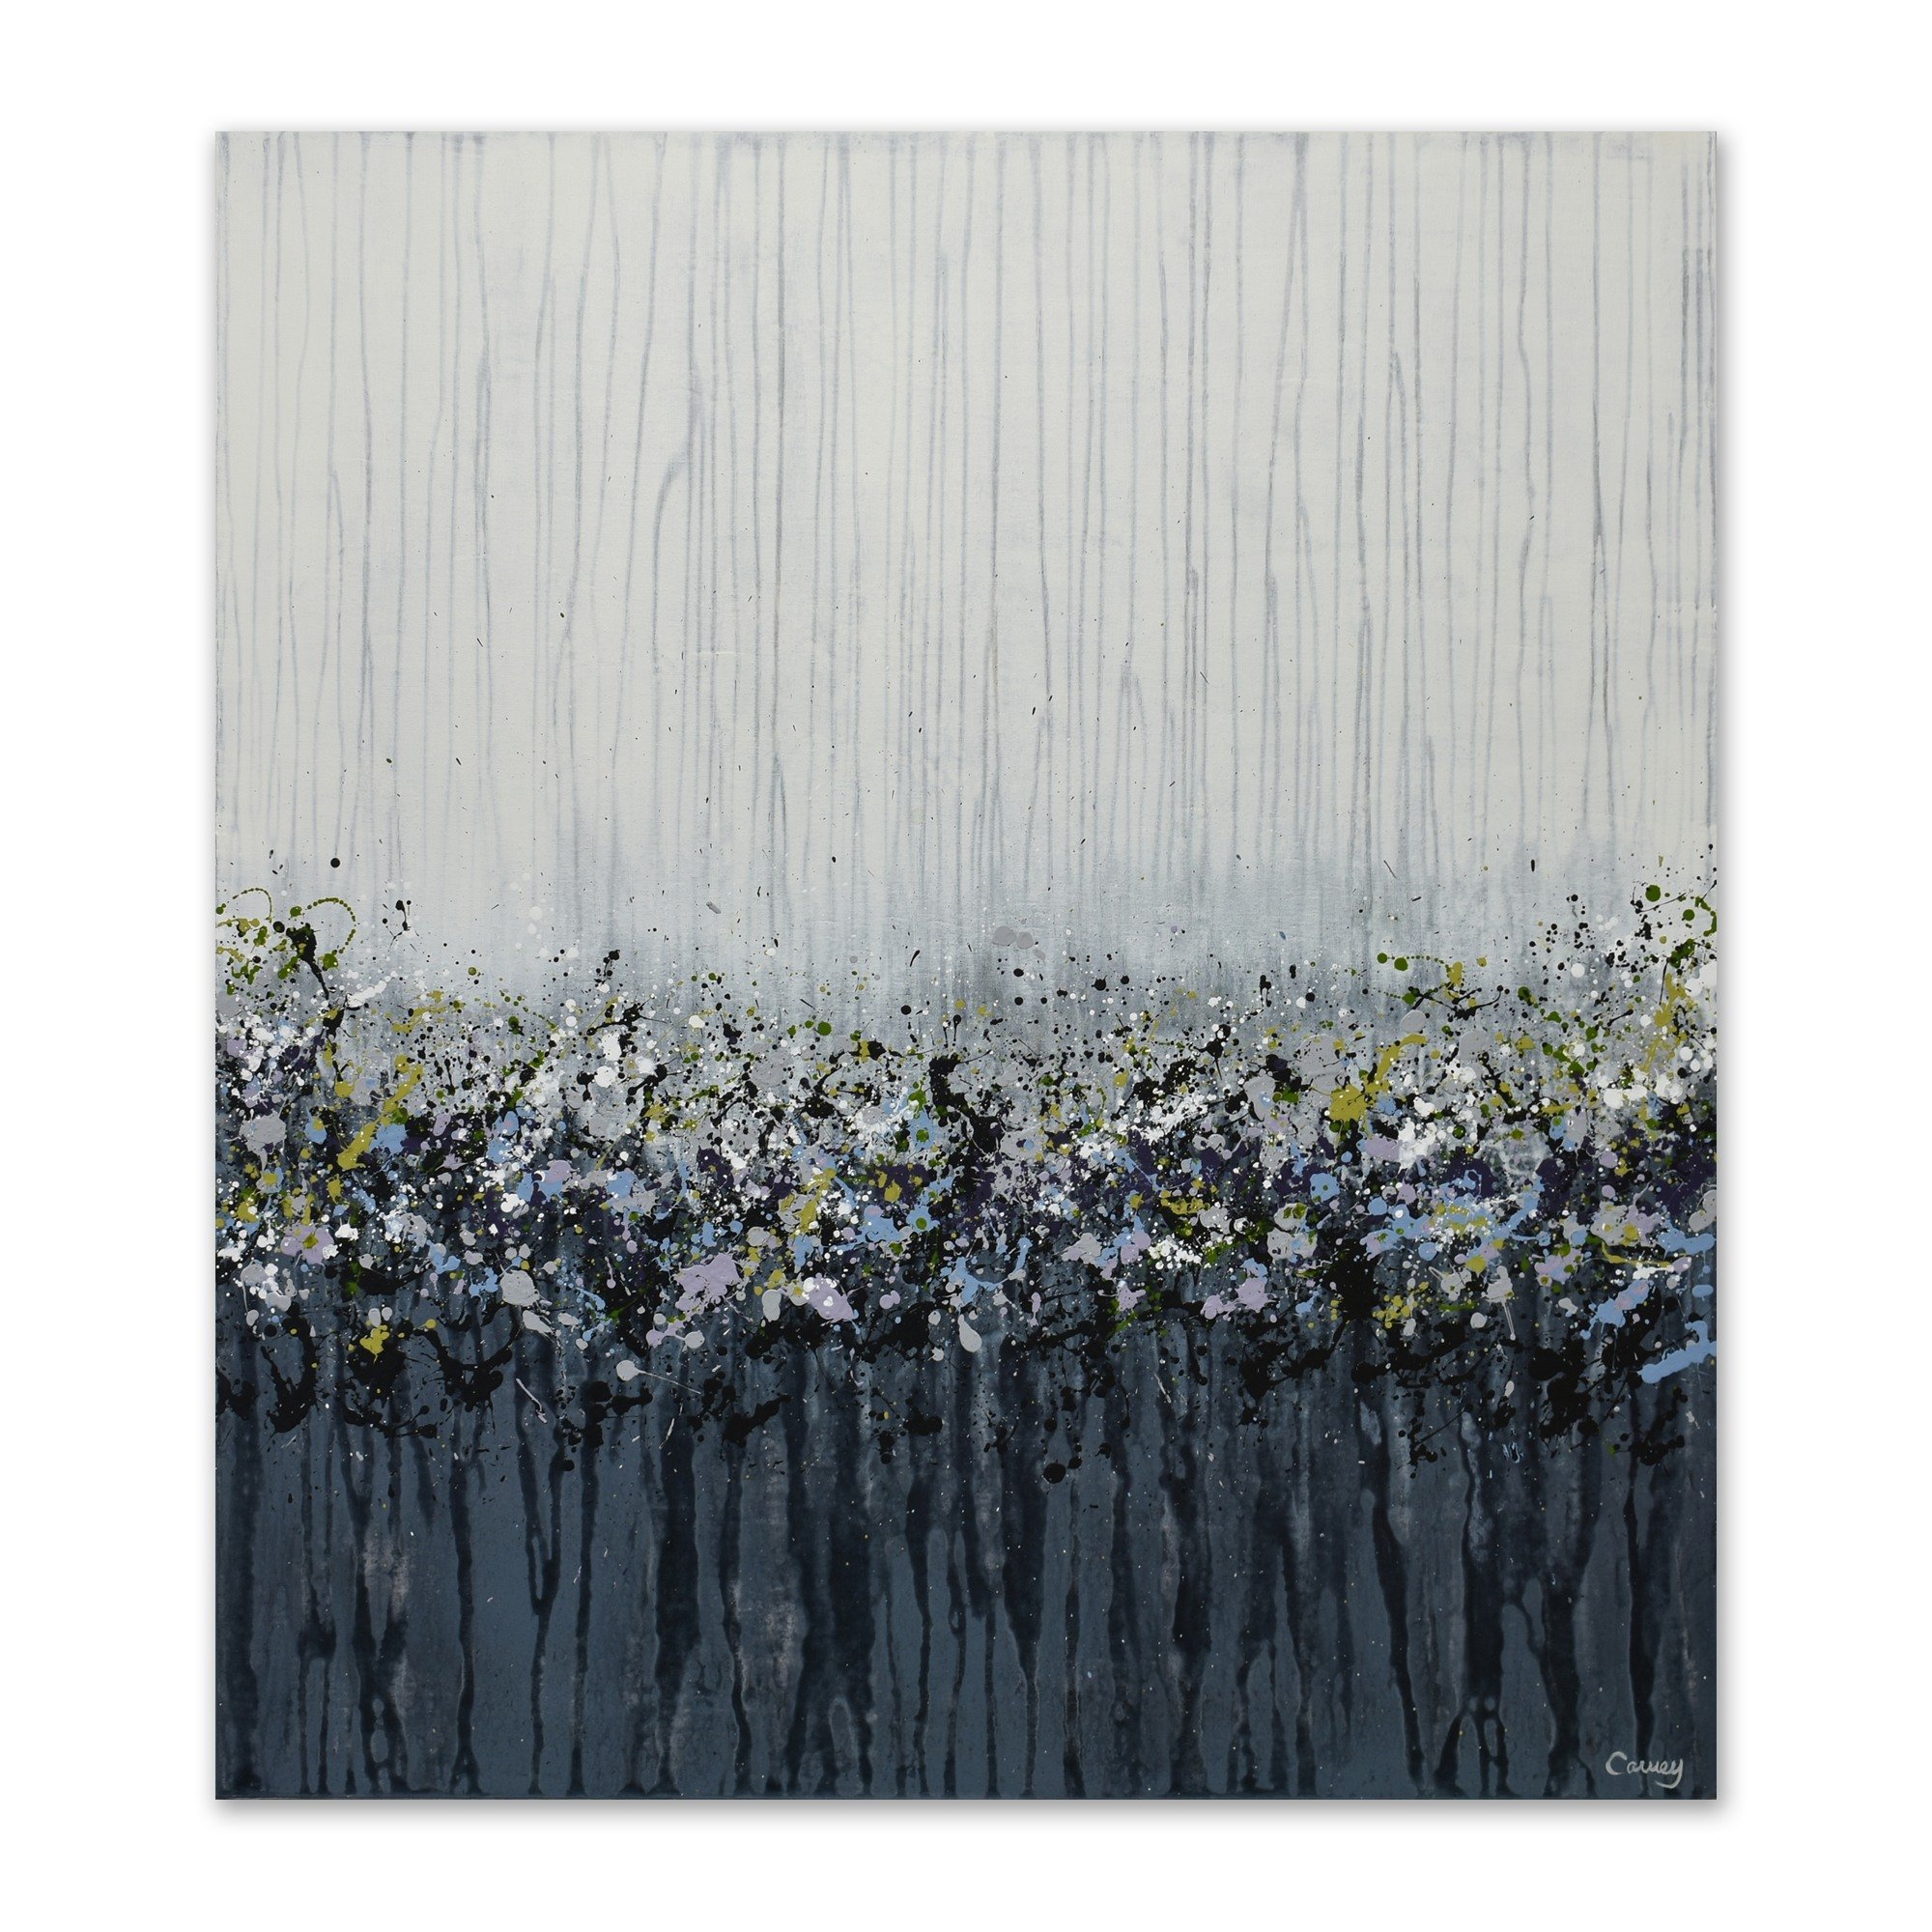 Midnight Moss is an abstract floral acrylic painting measuring 40 x 36 x 1.5&quot; (102 x 91 x 4 cm) and was created in 2022. Its color palette consists of blue, grey and accents of mauve and moss green for an elegant and peaceful look. More info abo